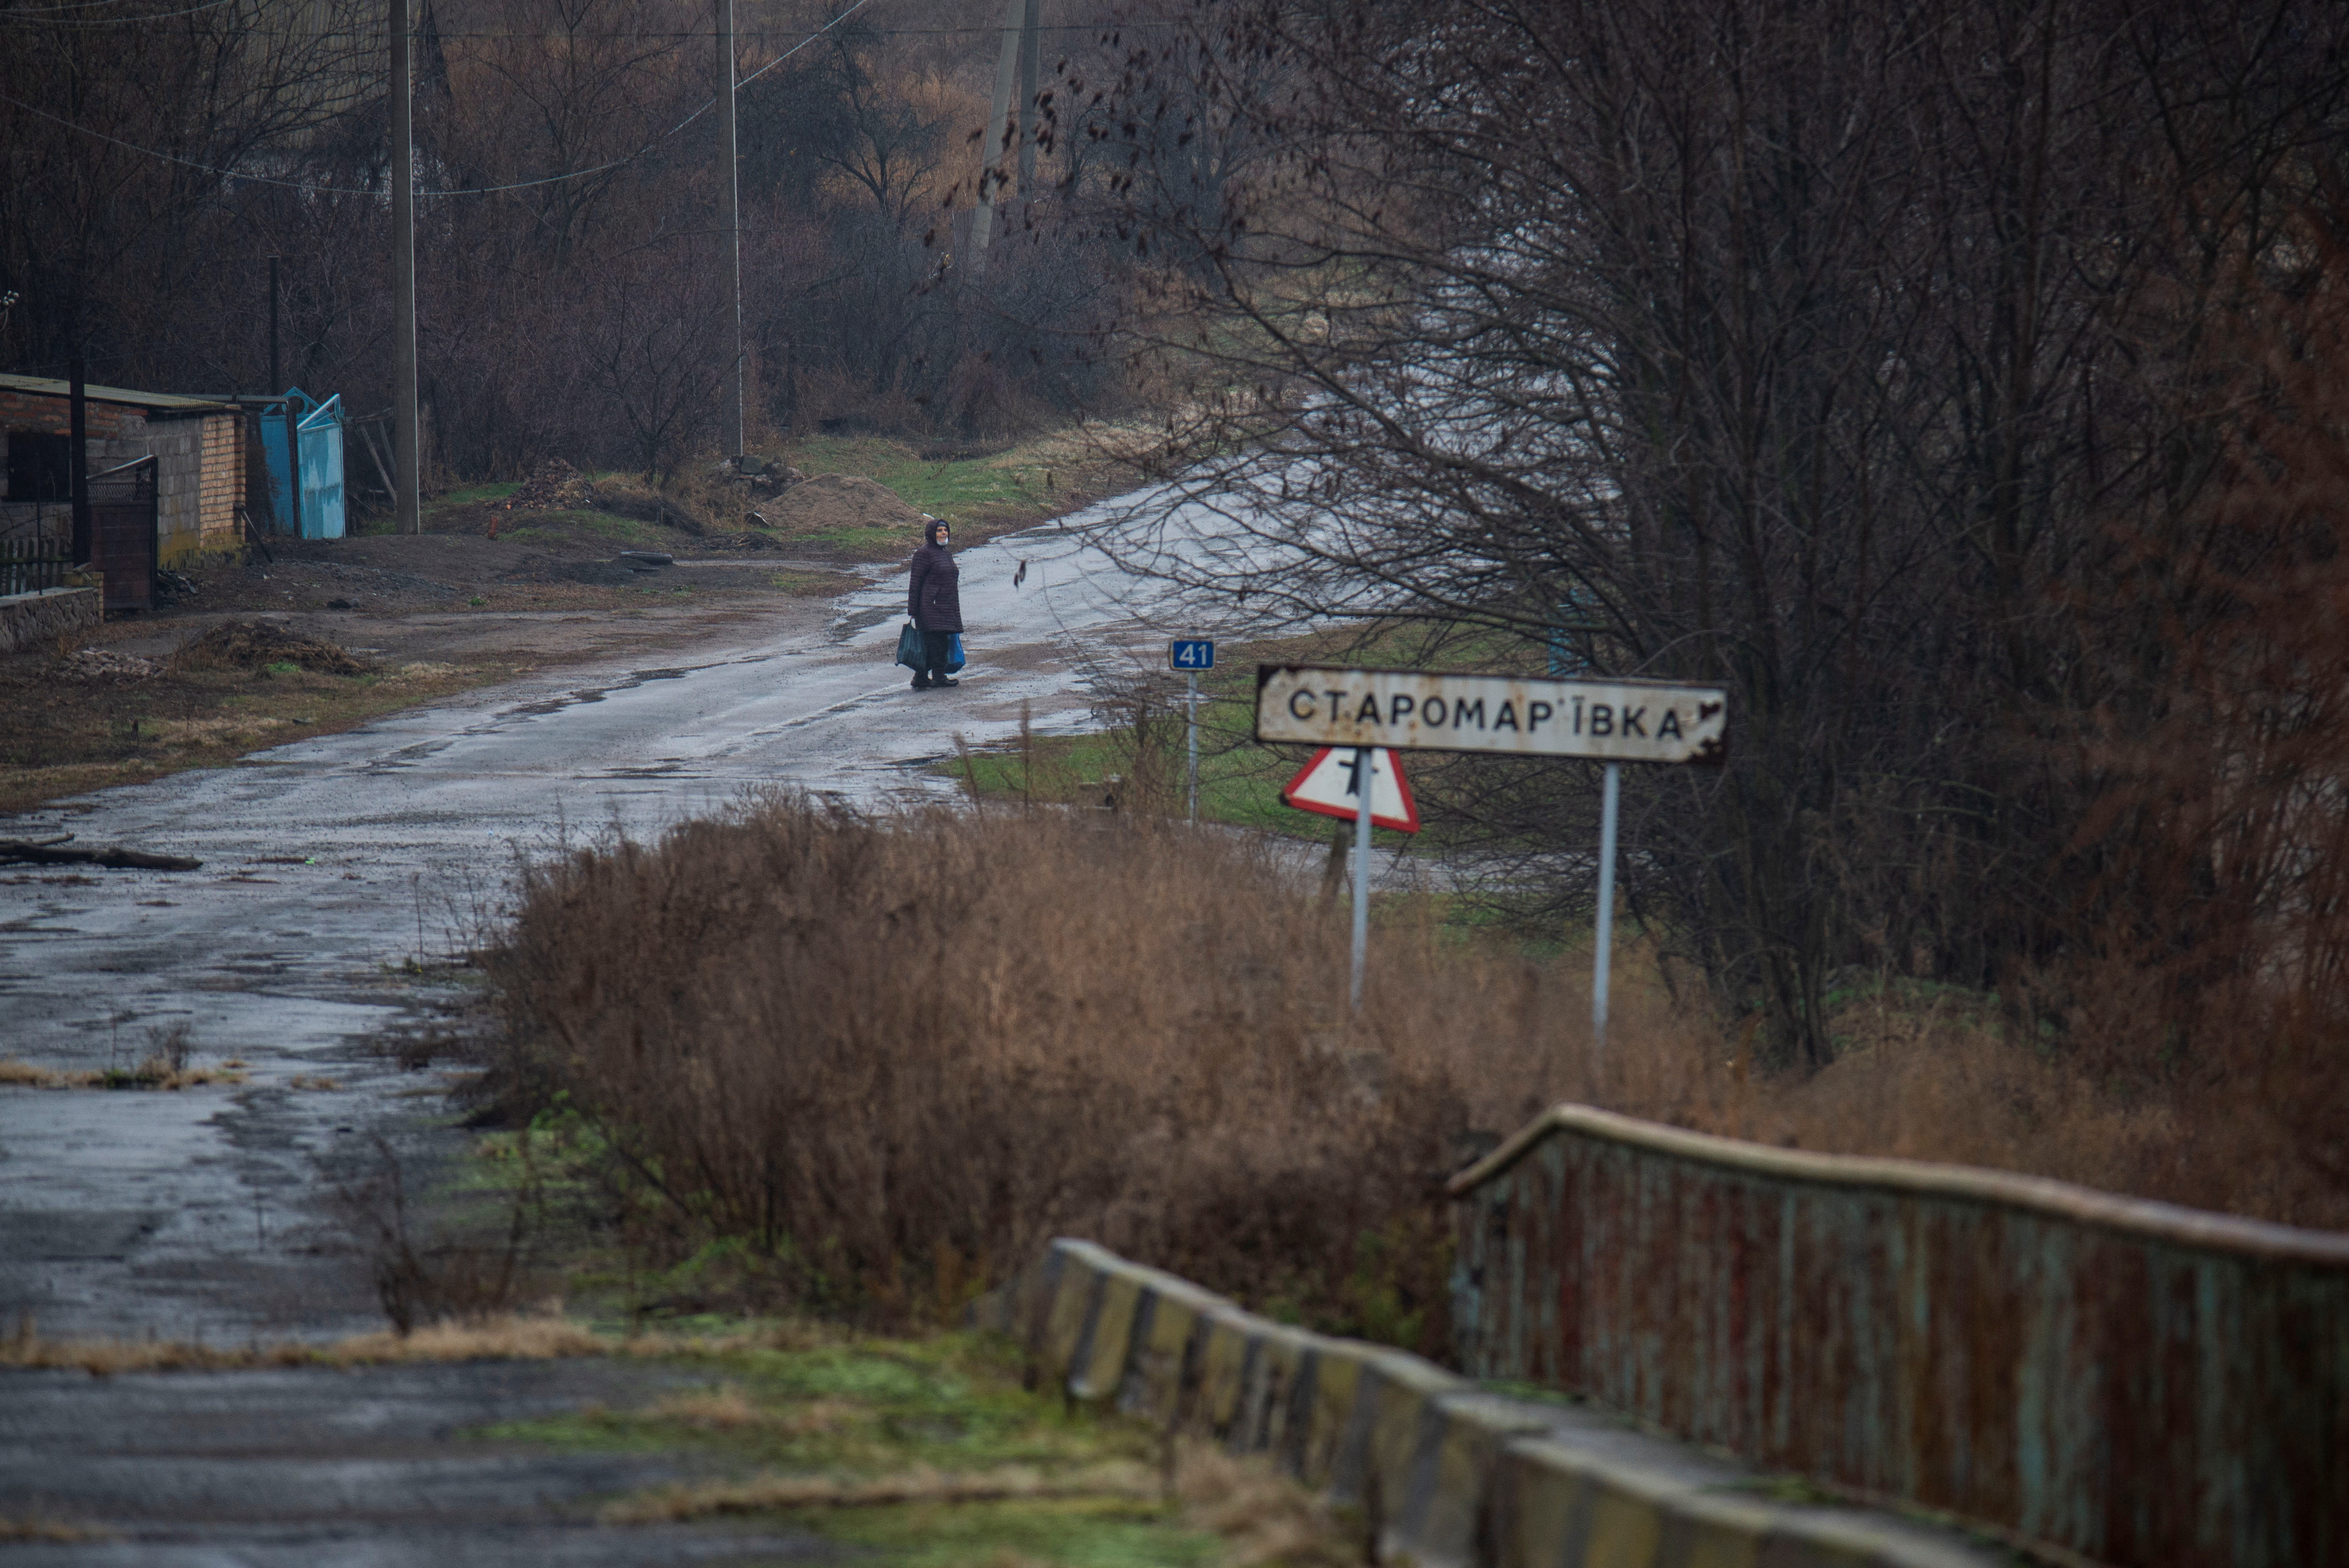 A woman stands on a road in the village of Staromarivka in Donetsk Region